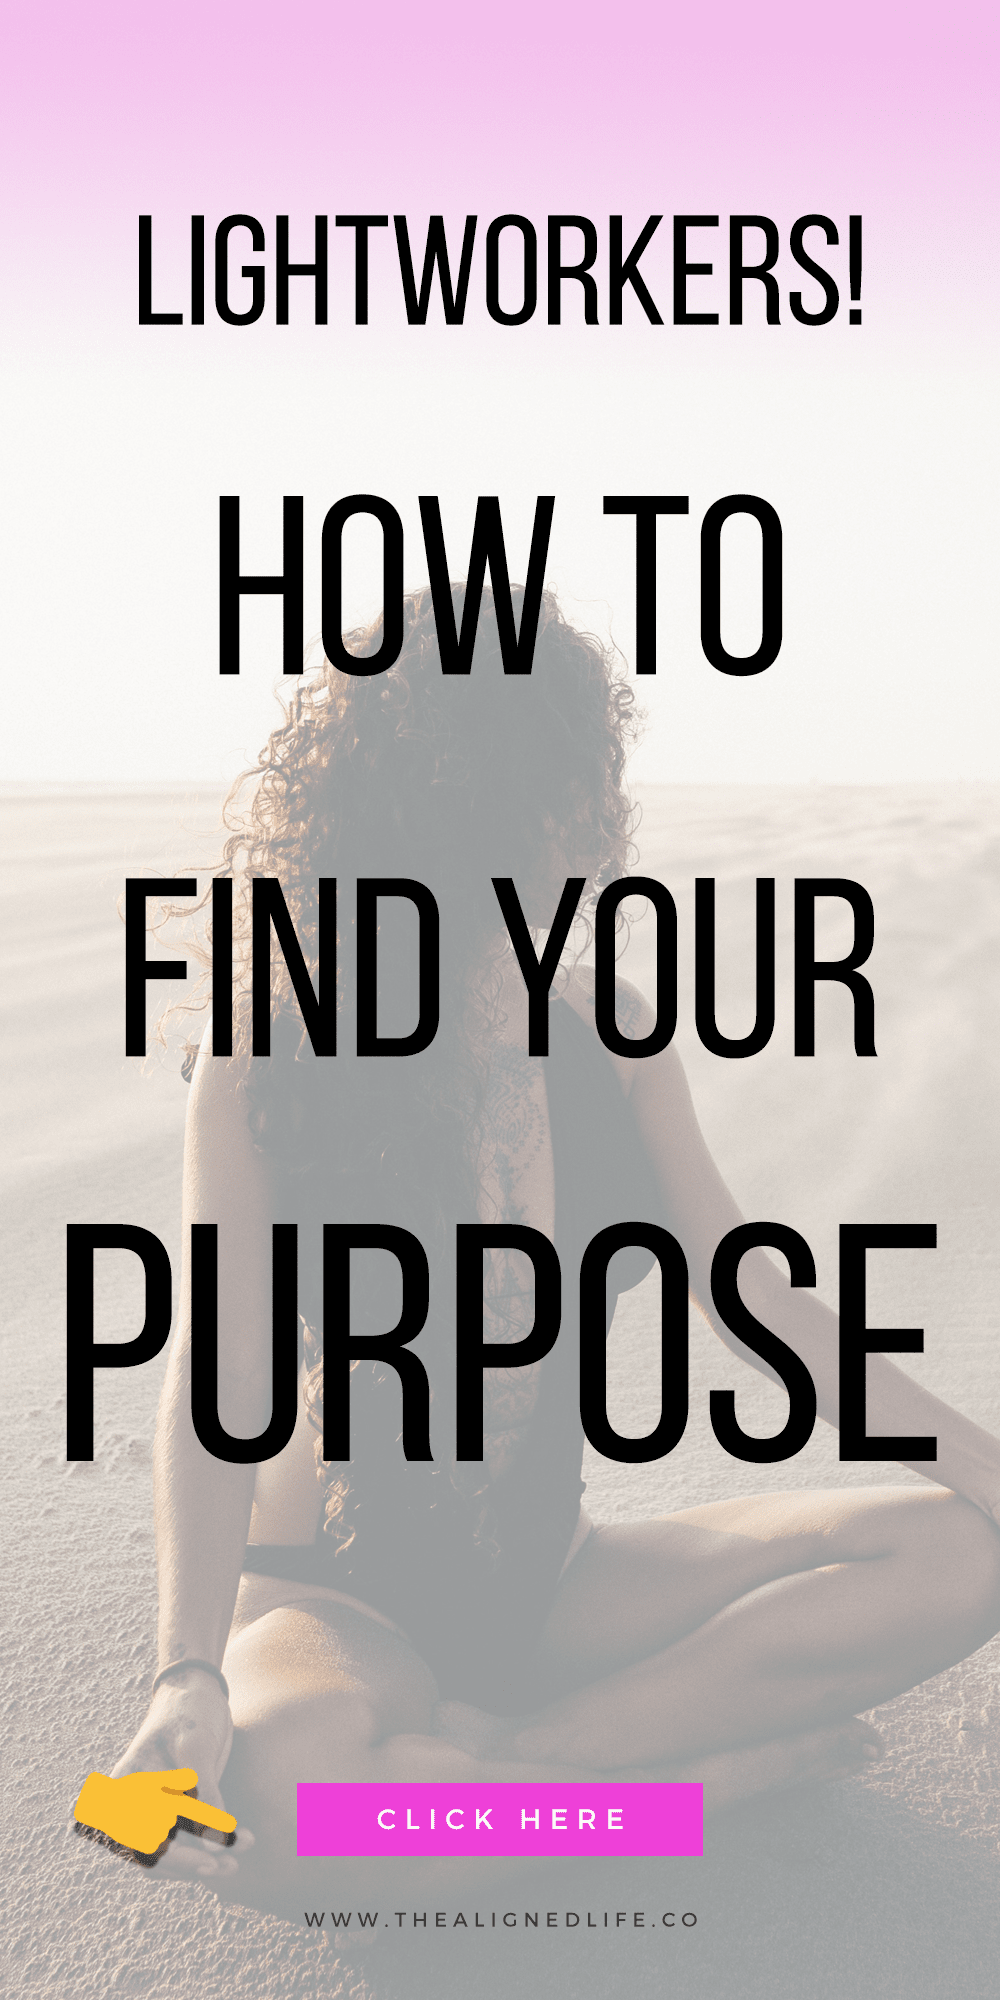 girl on the beach with text that reads Lightworkers! 3 Questions To Help You Find Your Purpose